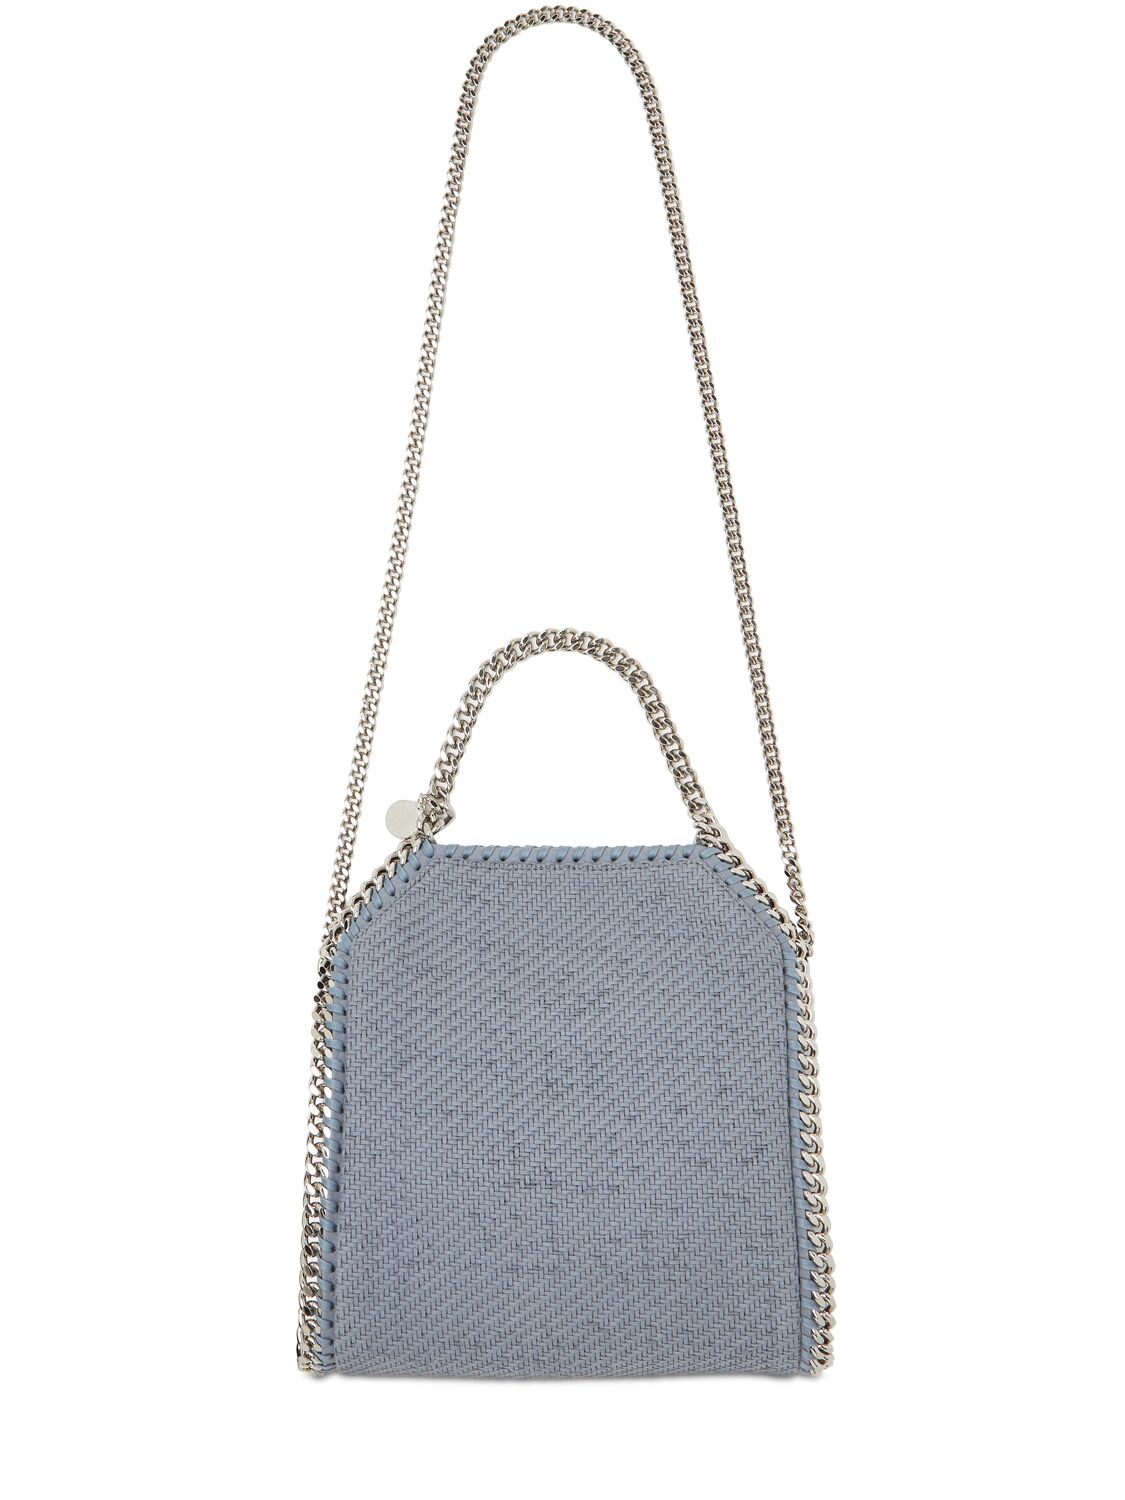 Stella Mccartney Tiny Woven Faux Suede Leather Tote Bag In Blue Grey